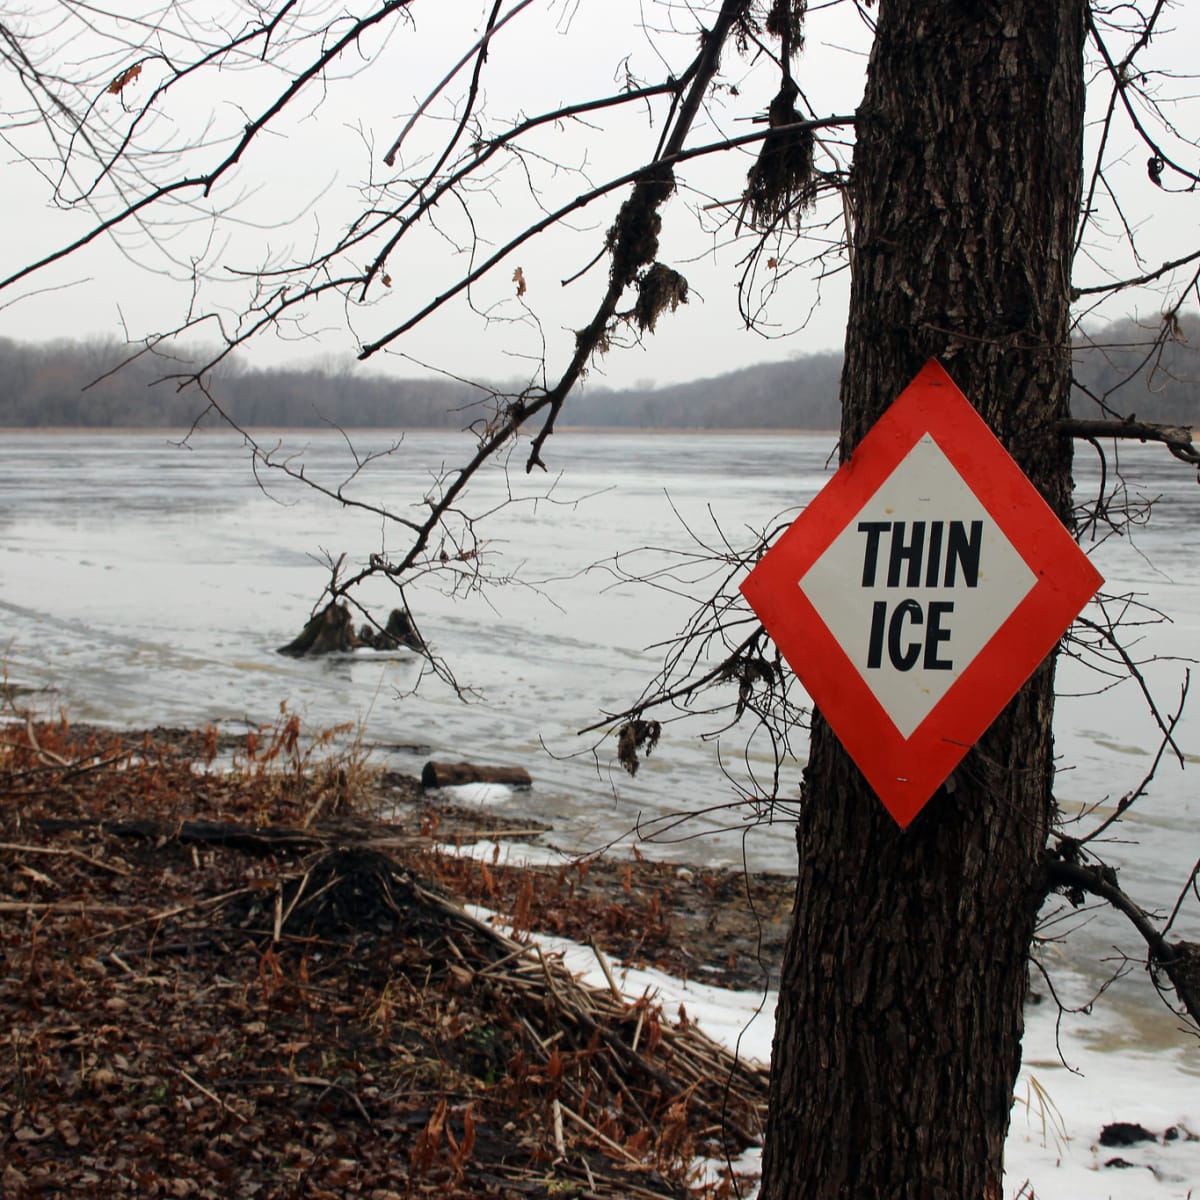 Fishing on THIN ICE!!! (DANGEROUS: DO NOT ATTEMPT) 